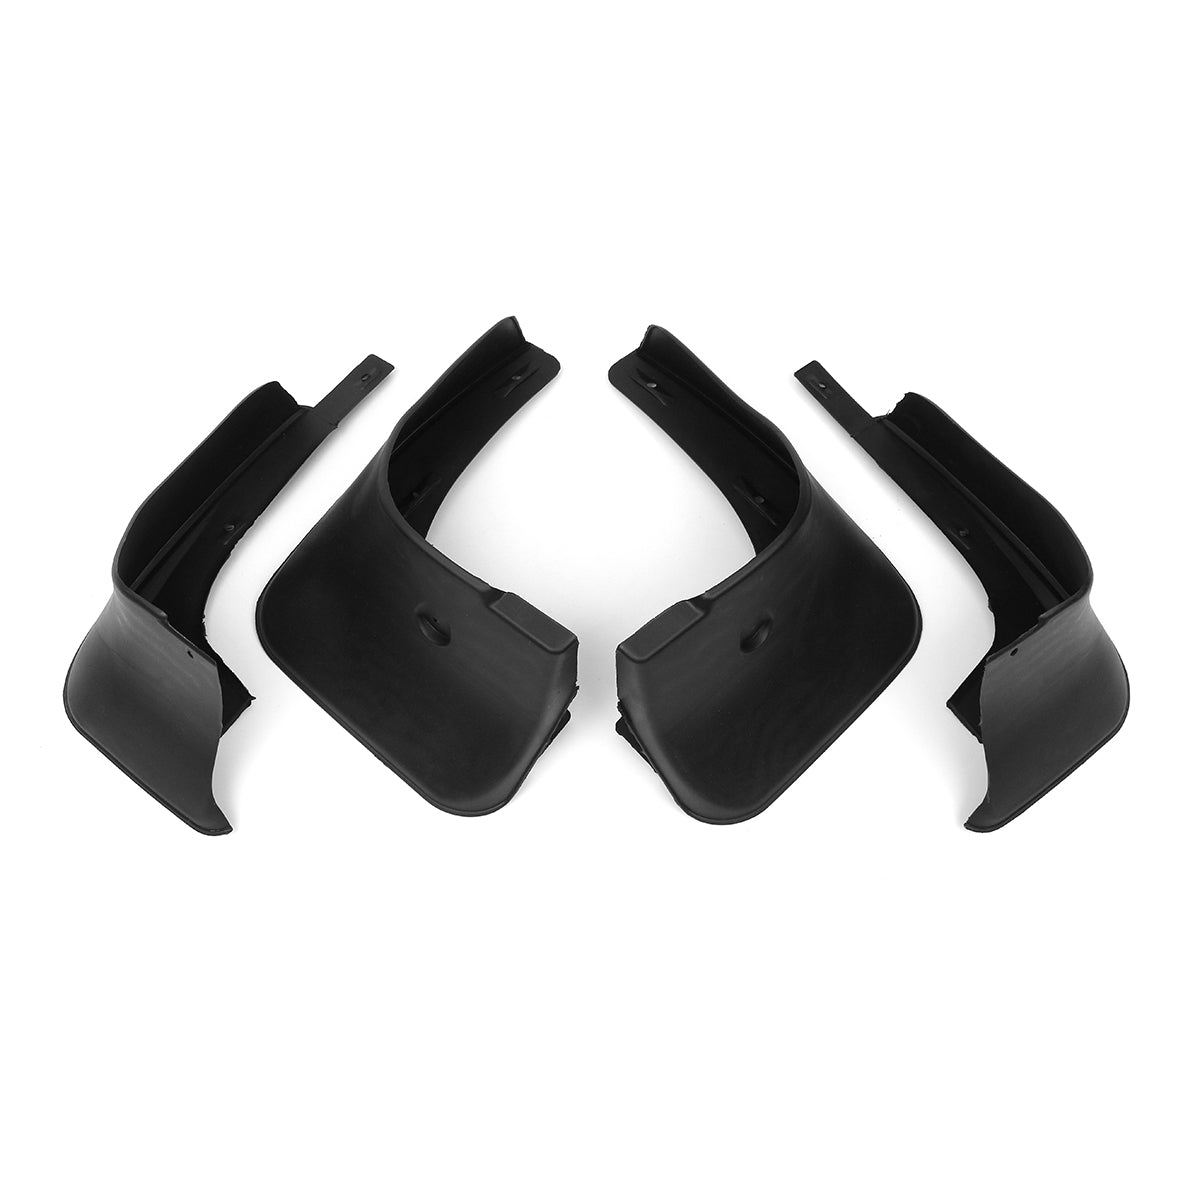 Black 4Pcs Front And Rear Mud Flaps Car Mudguards For Toyota Corolla Altis E140 2007-2013